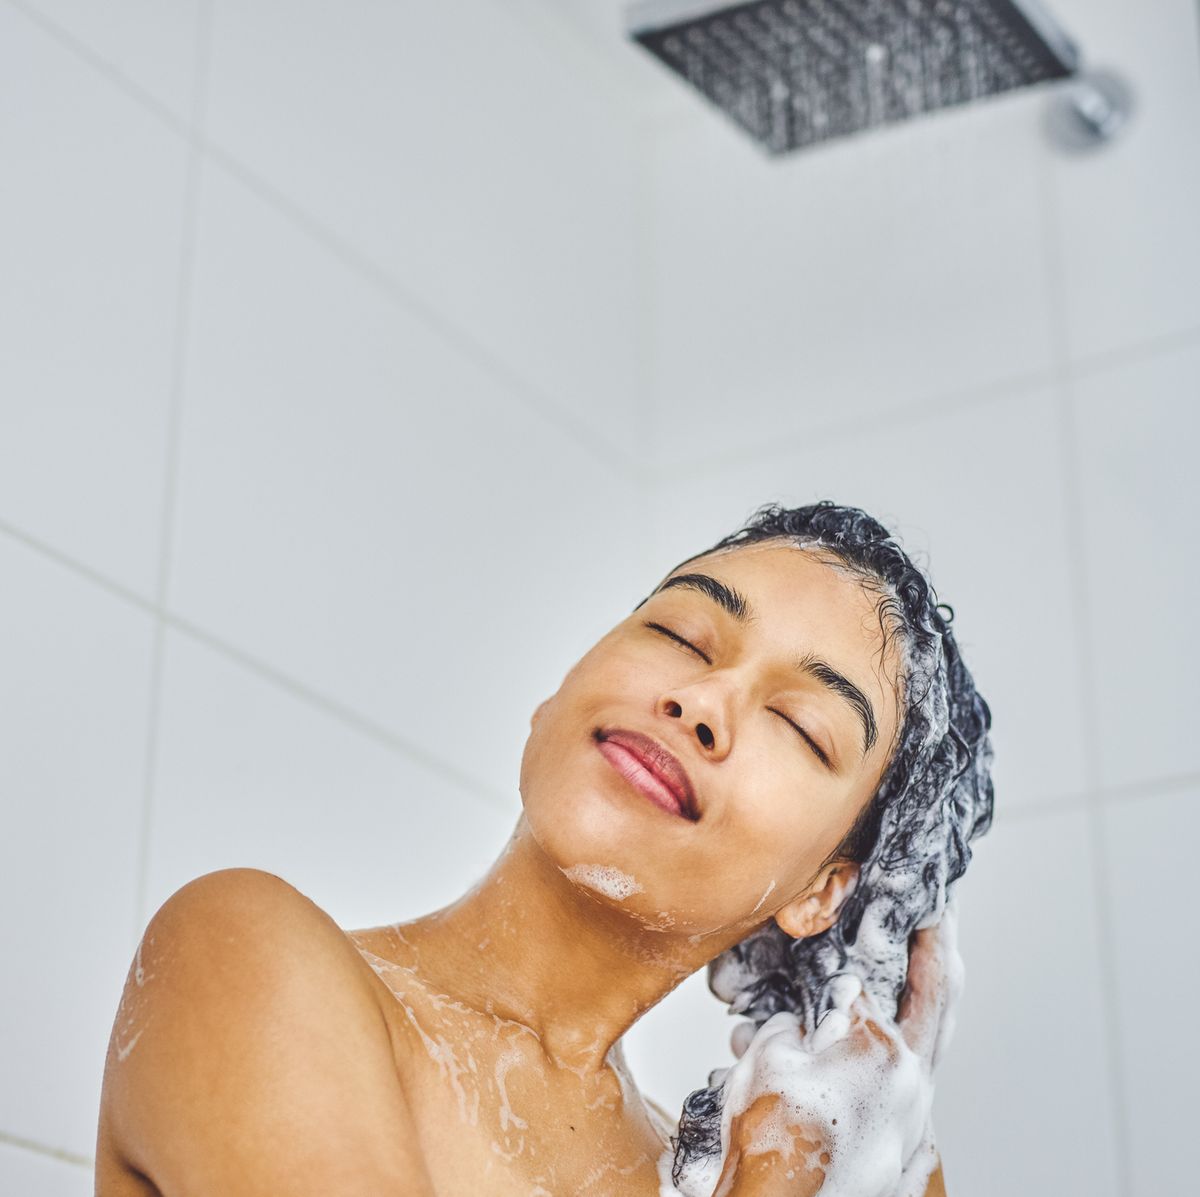 Dermatologist explains why taking a shower is better than a bath